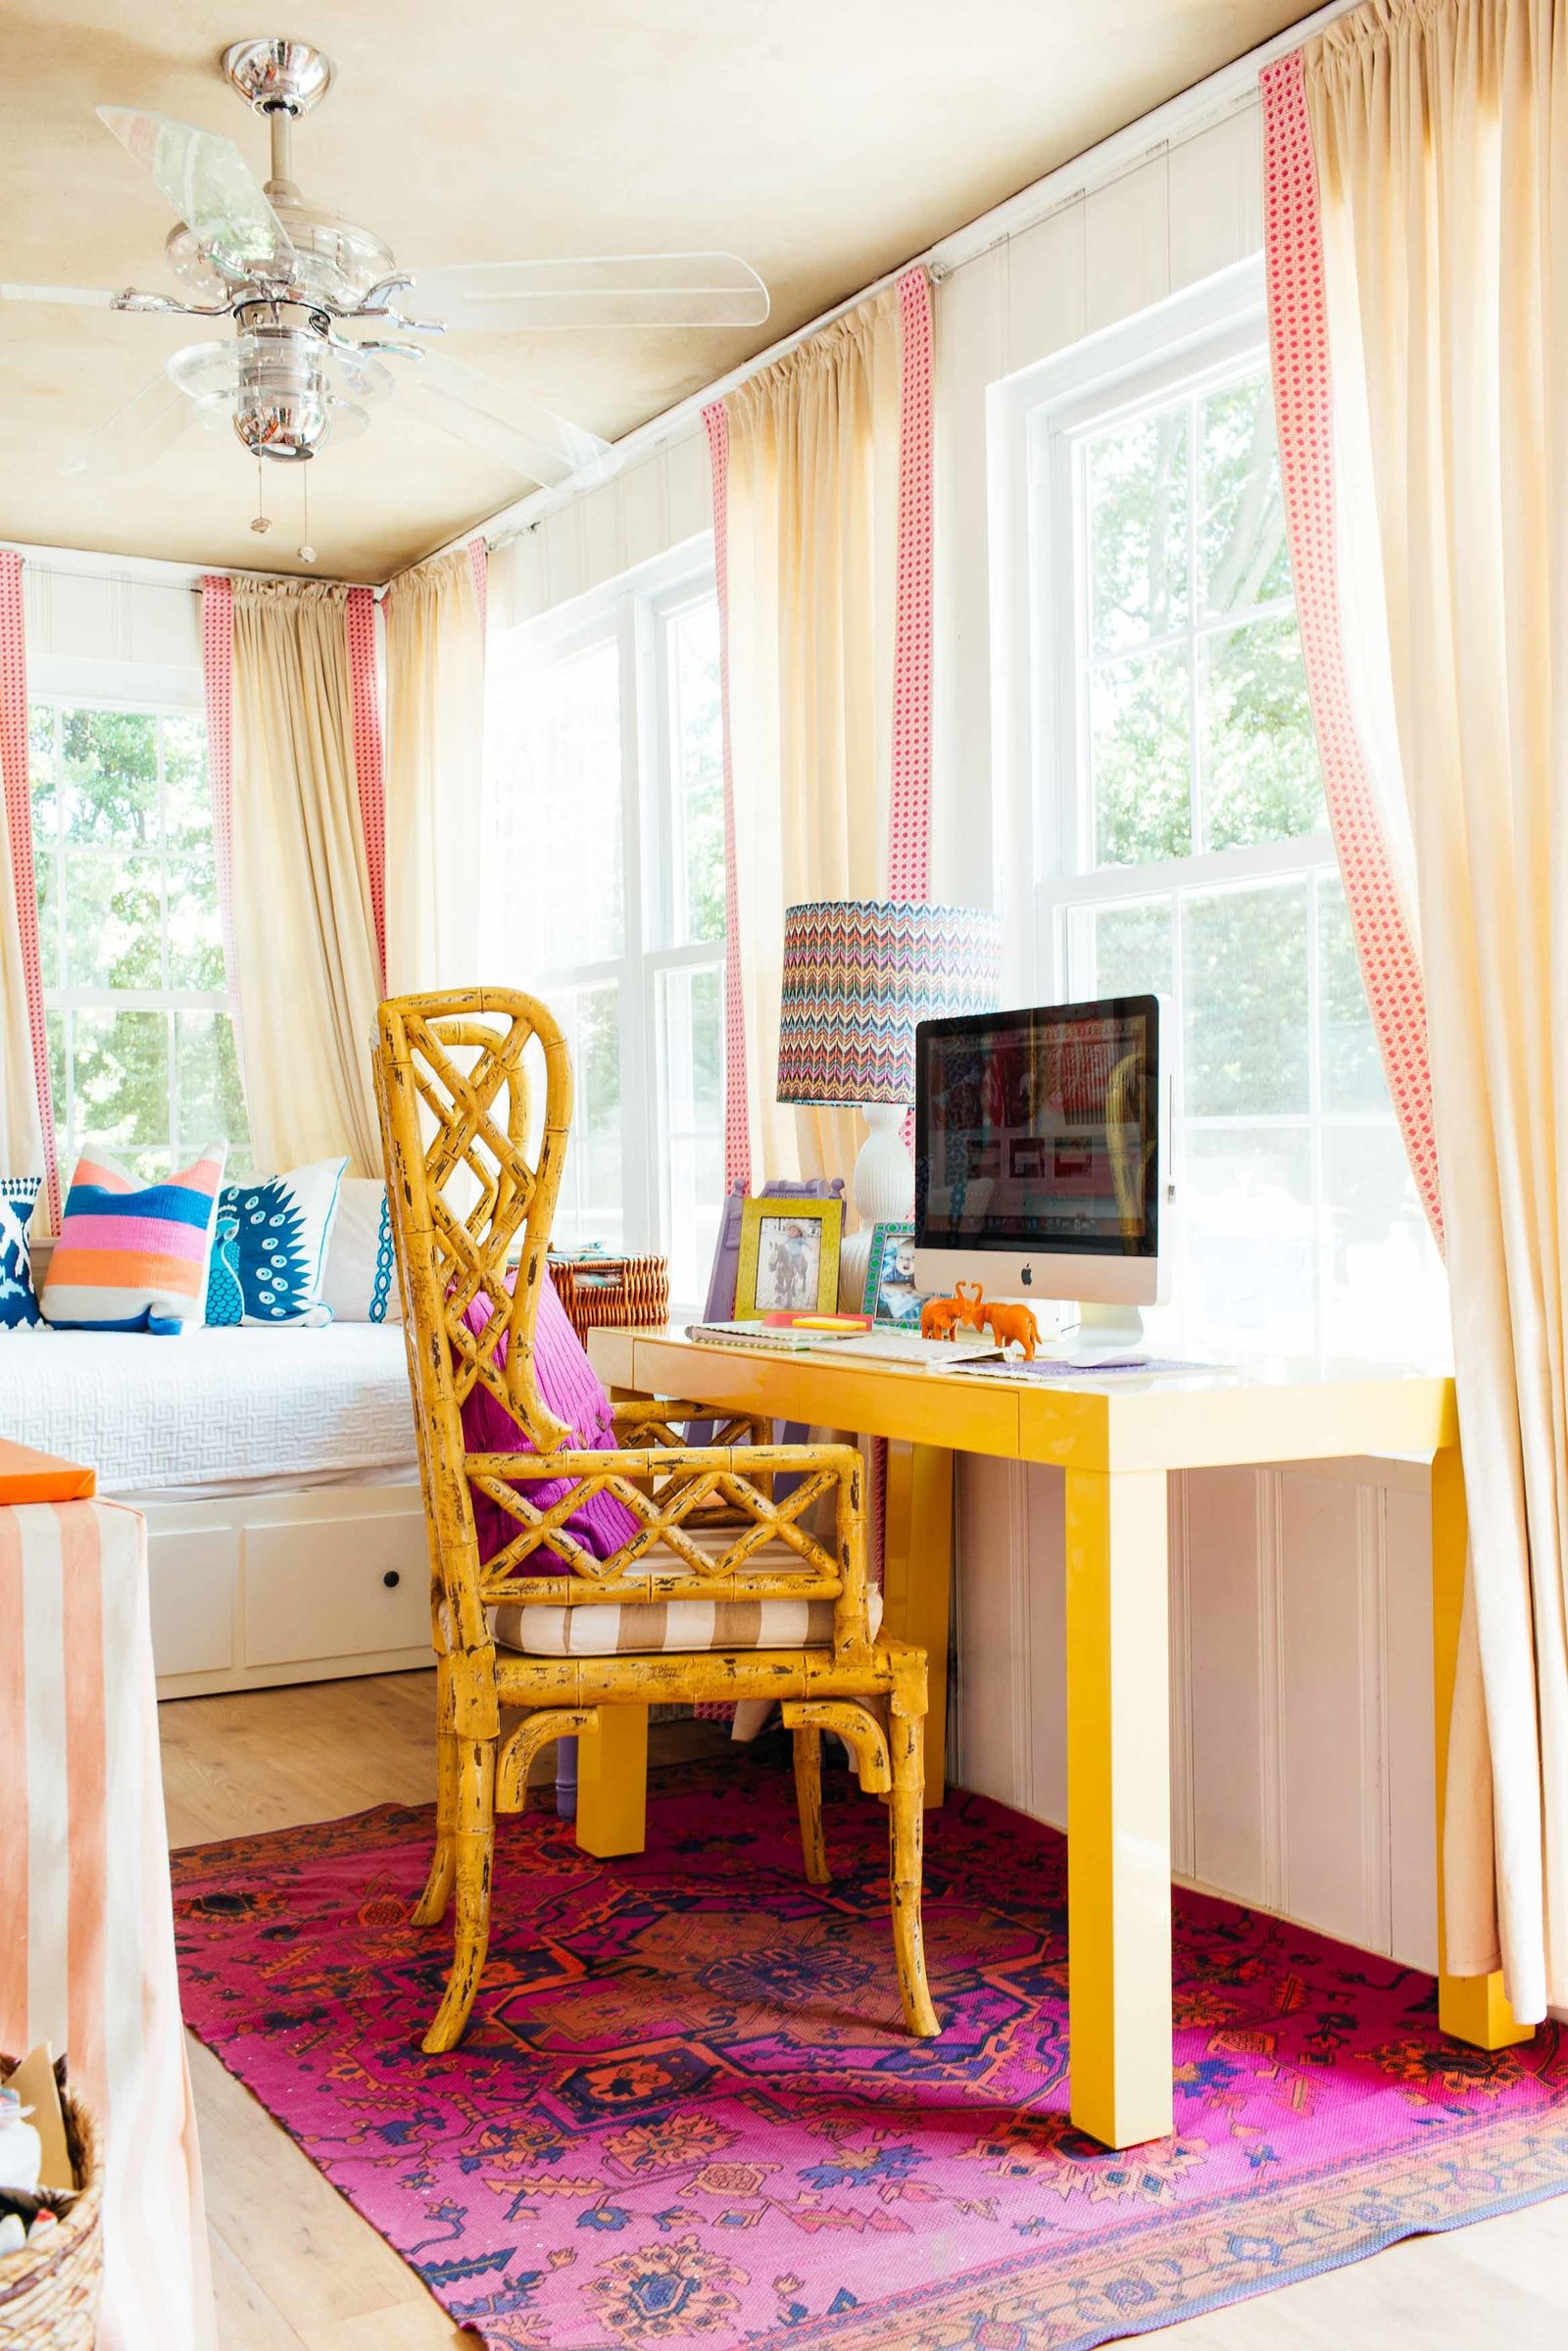 A colorful  interior design studio with day bed and yellow computer desk.